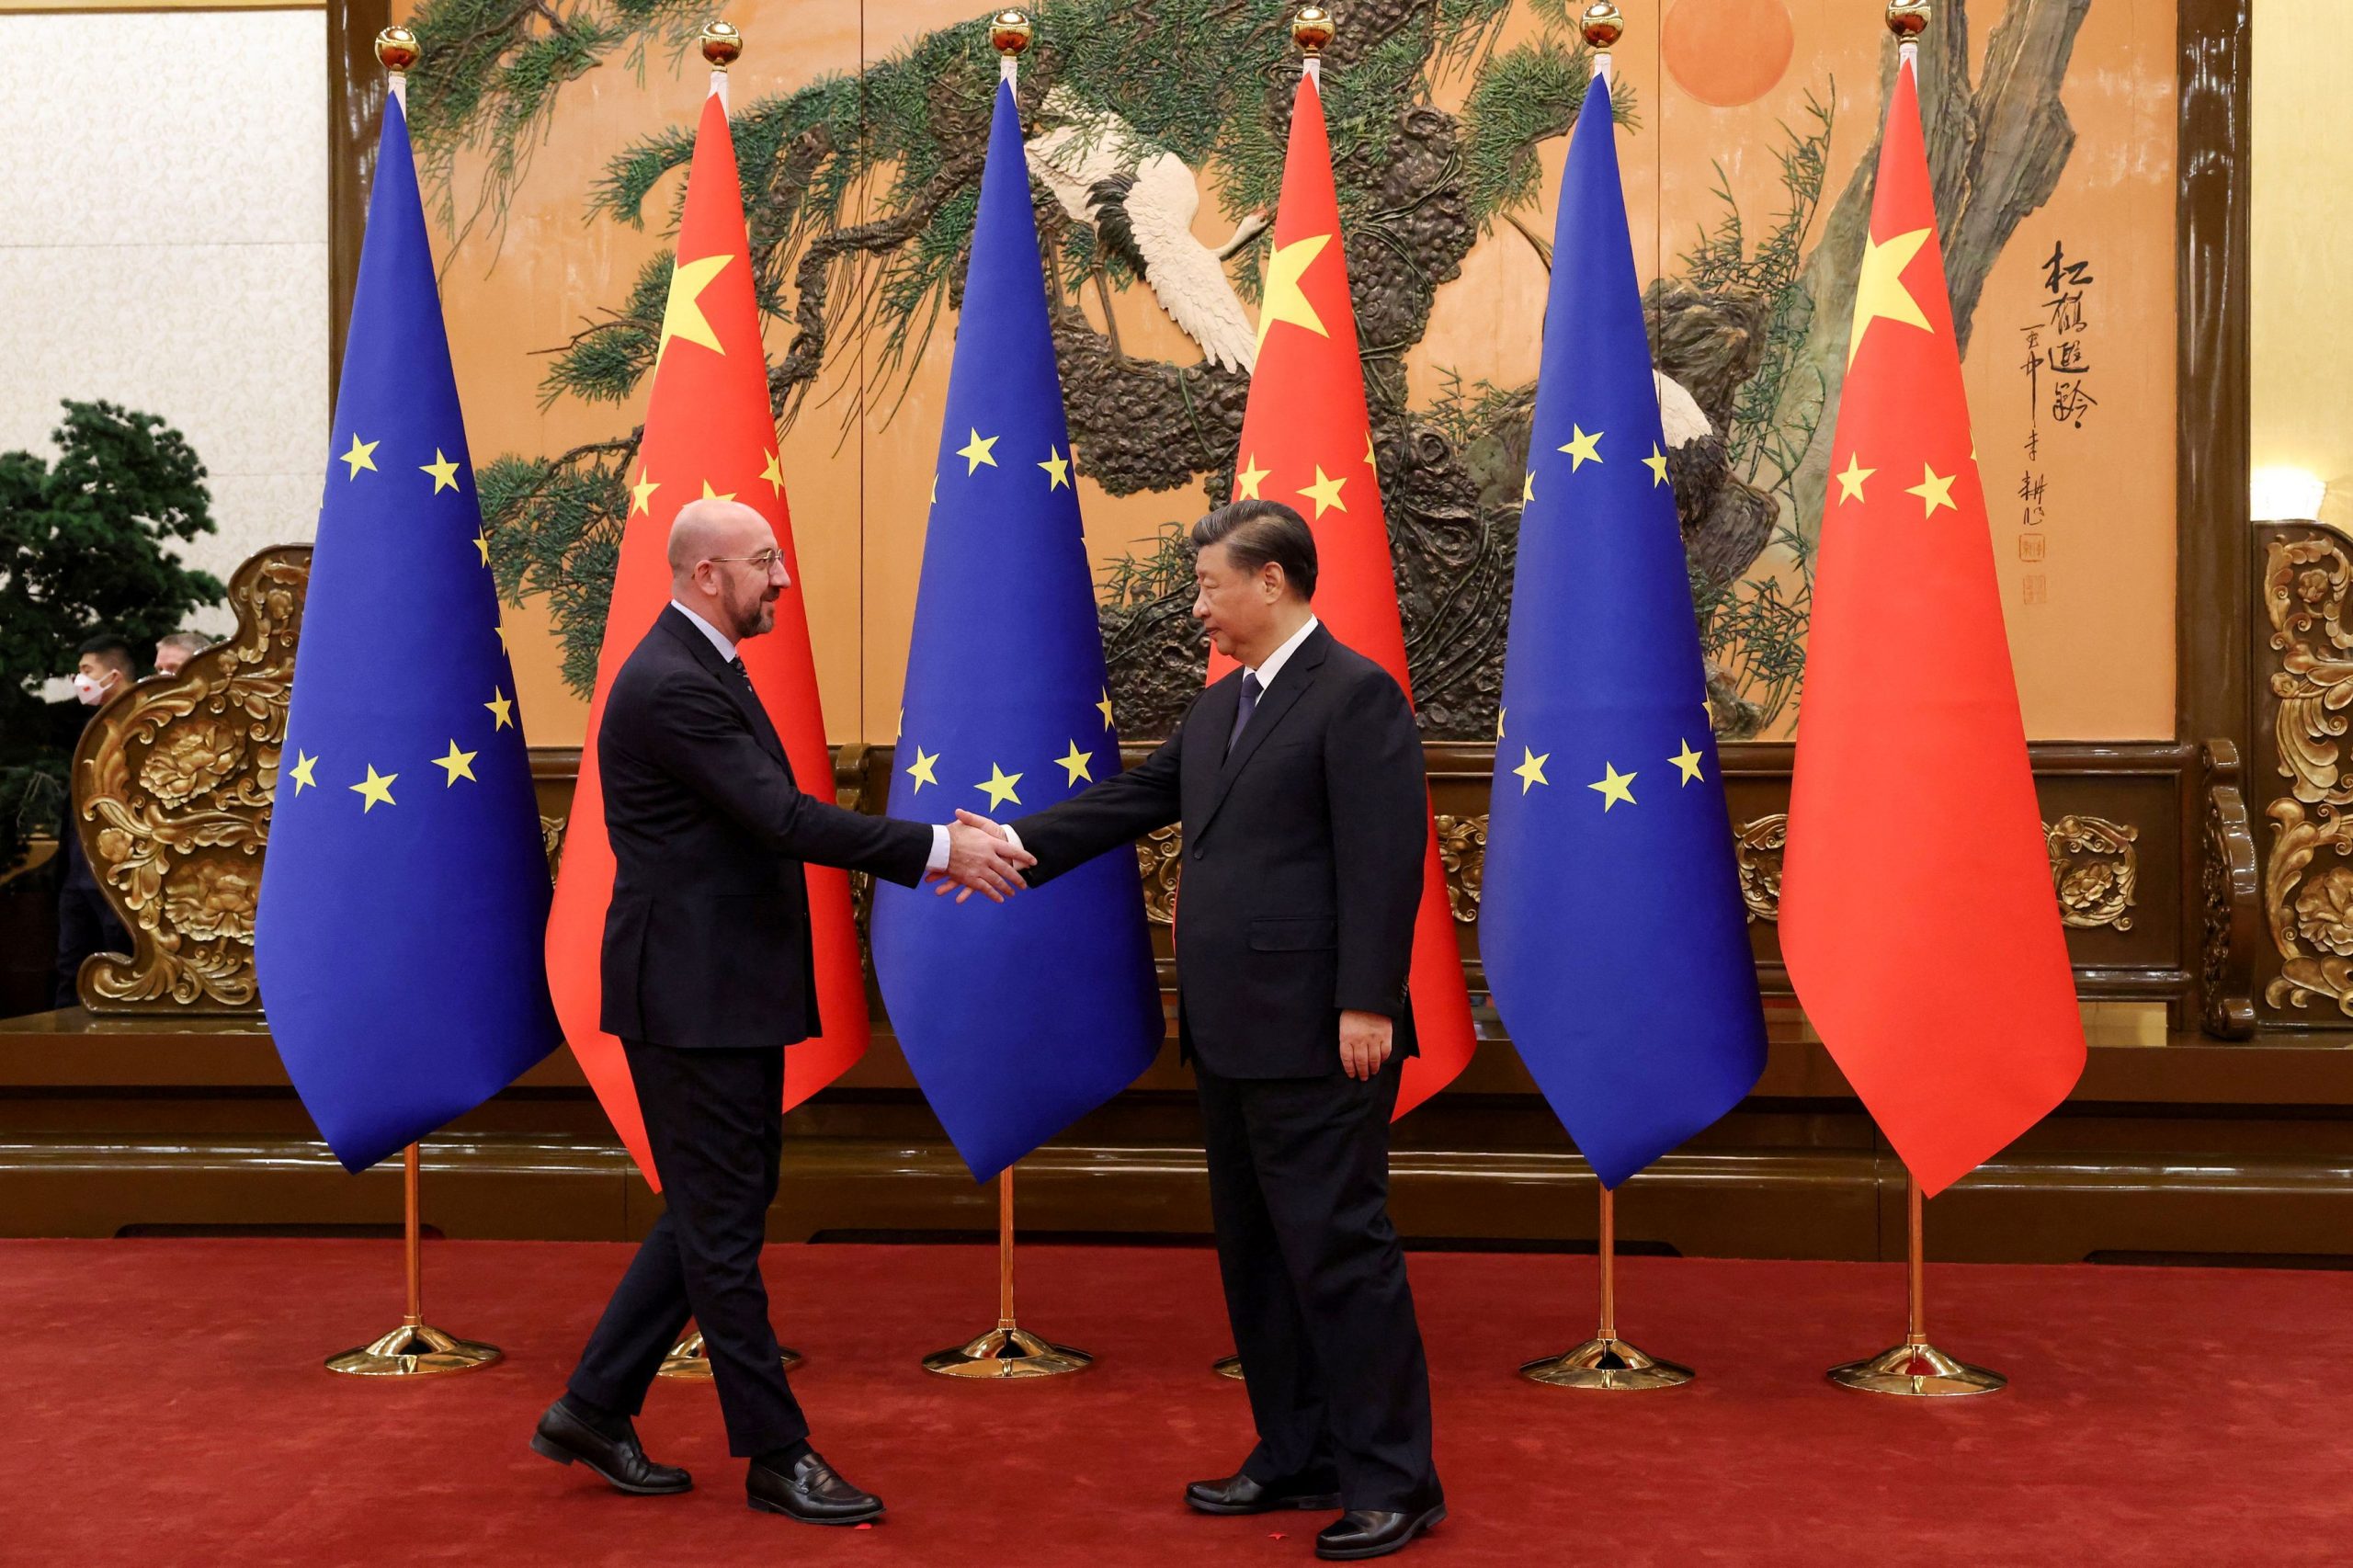 China and the EU Brace for a Tense Summit